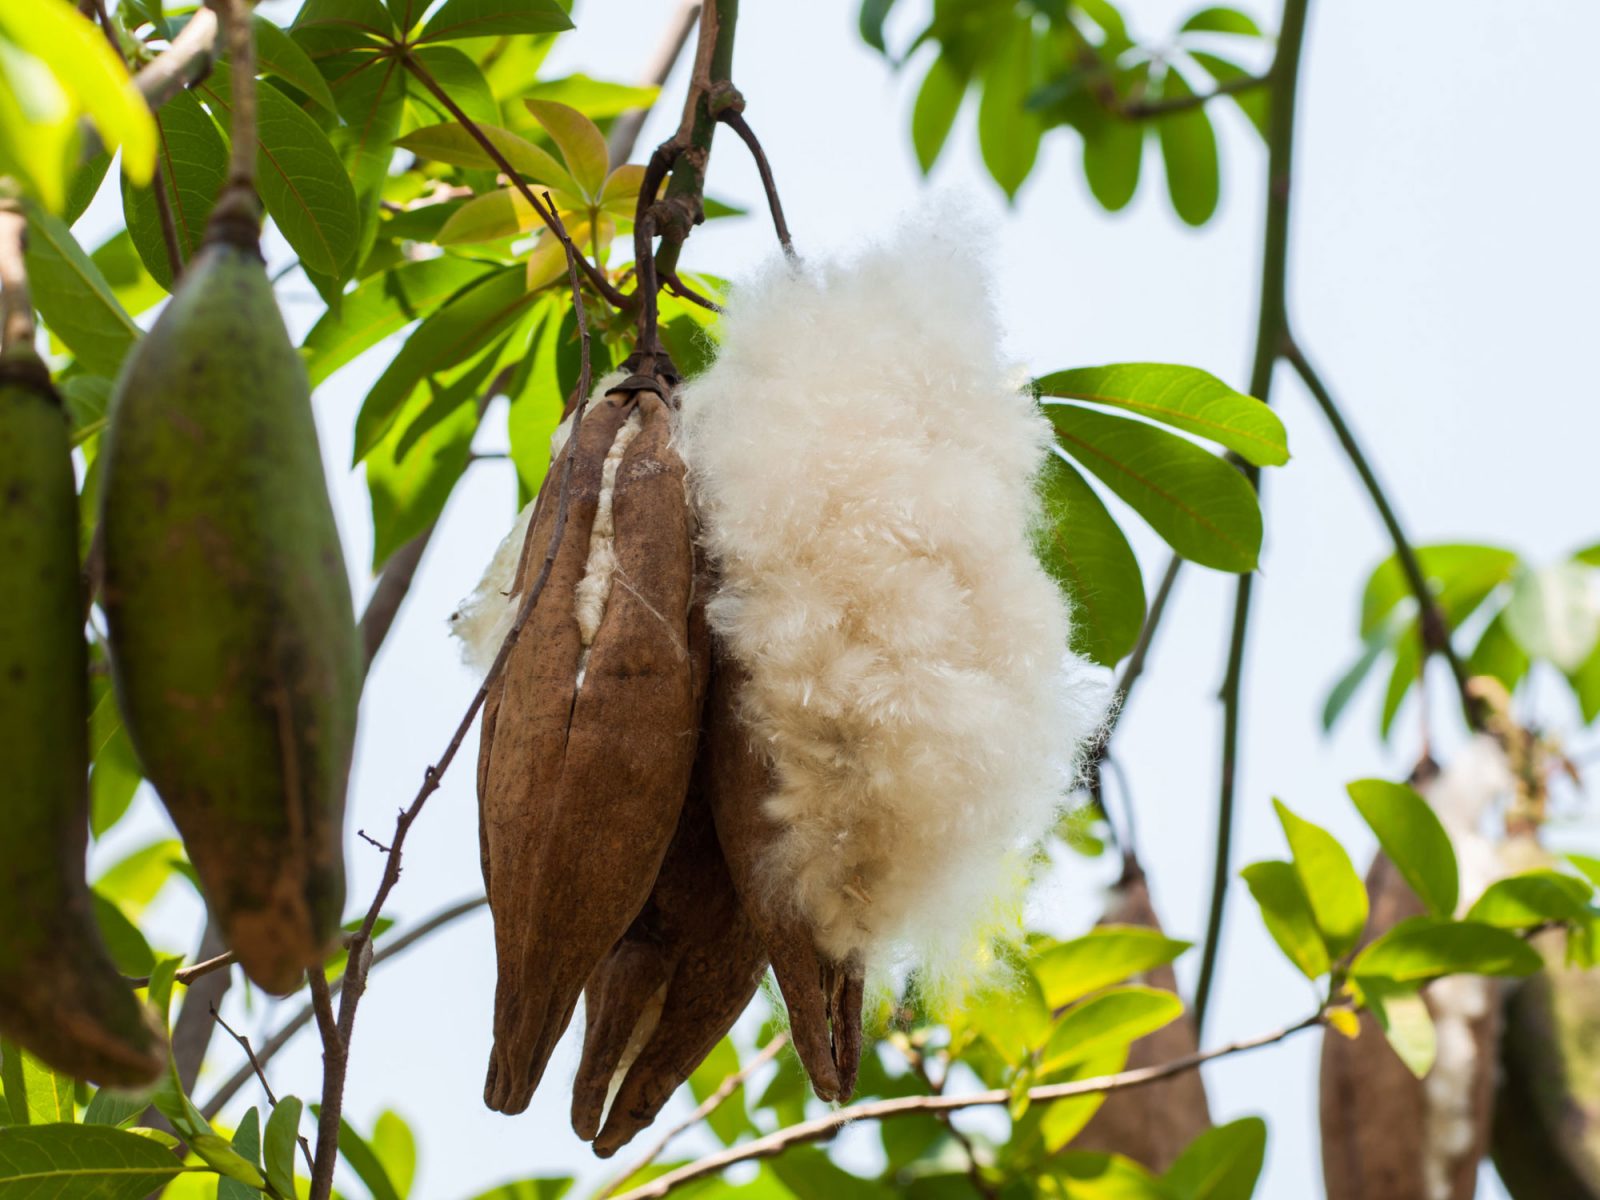 Close-up of a large fruit with fuzzy interior hanging in a kapok tree.